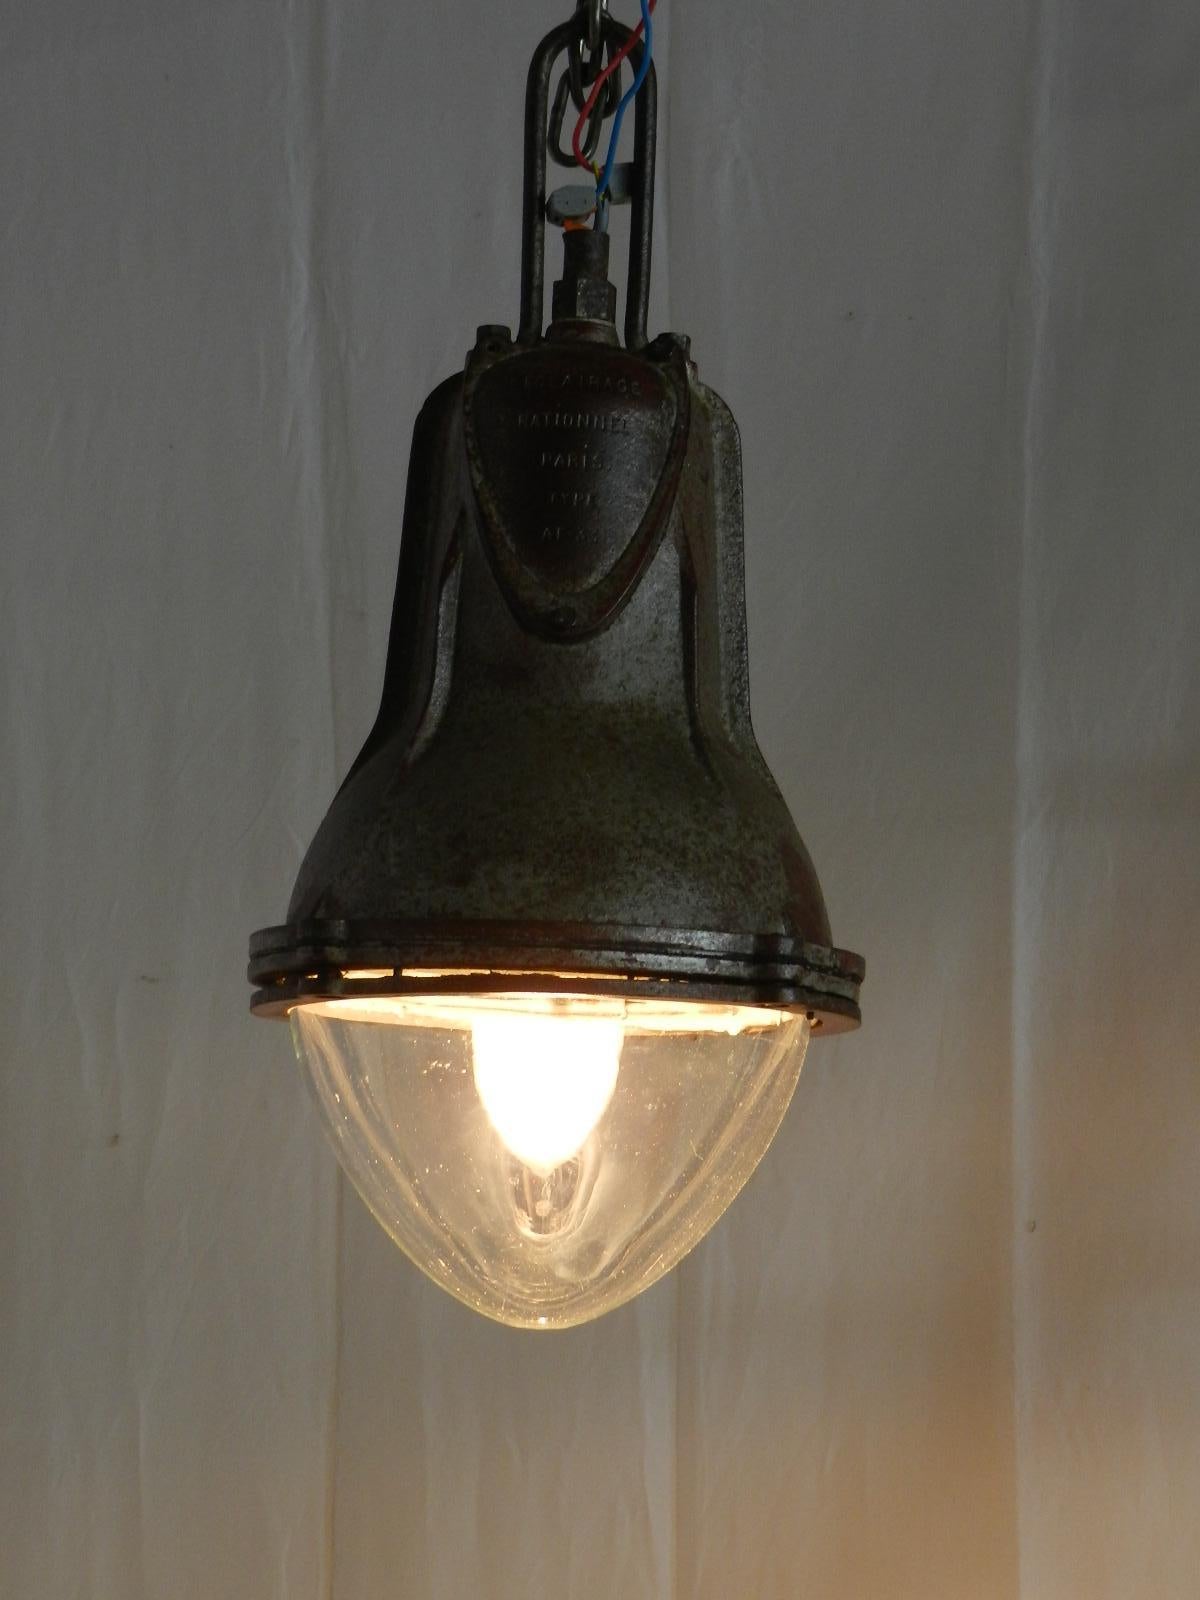 Mid-20th Century Pair of Industrial Pendant Lights Large French Glass Iron and Chains Midcentury